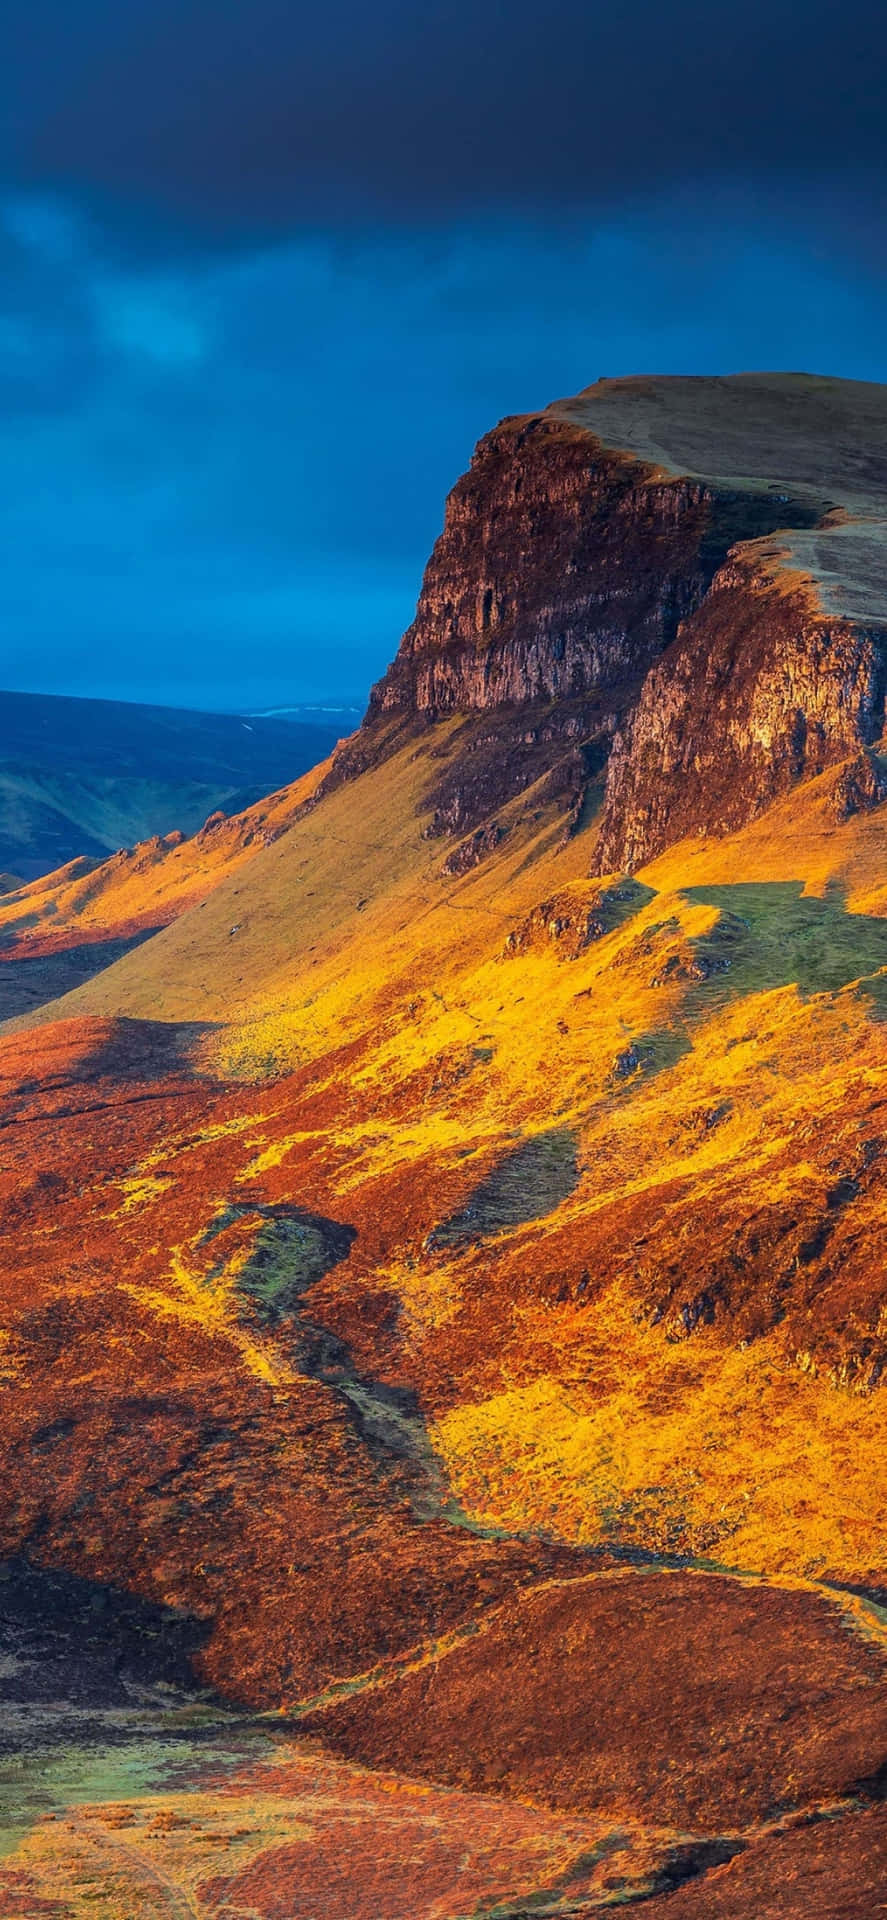 A Mountain Range With A Yellow And Orange Landscape Wallpaper